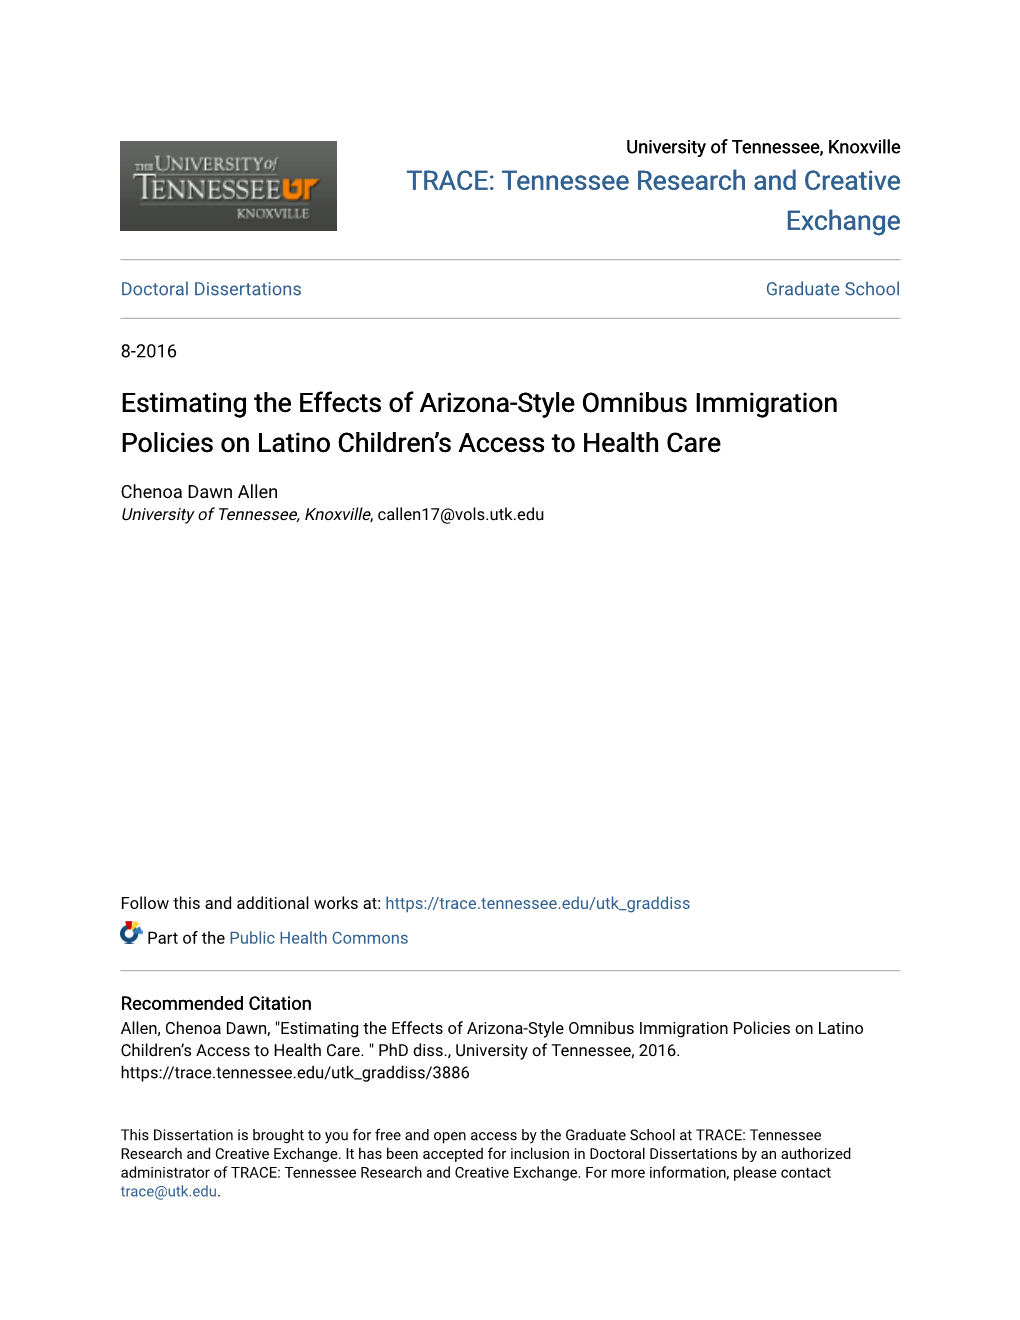 Estimating the Effects of Arizona-Style Omnibus Immigration Policies on Latino Children’S Access to Health Care